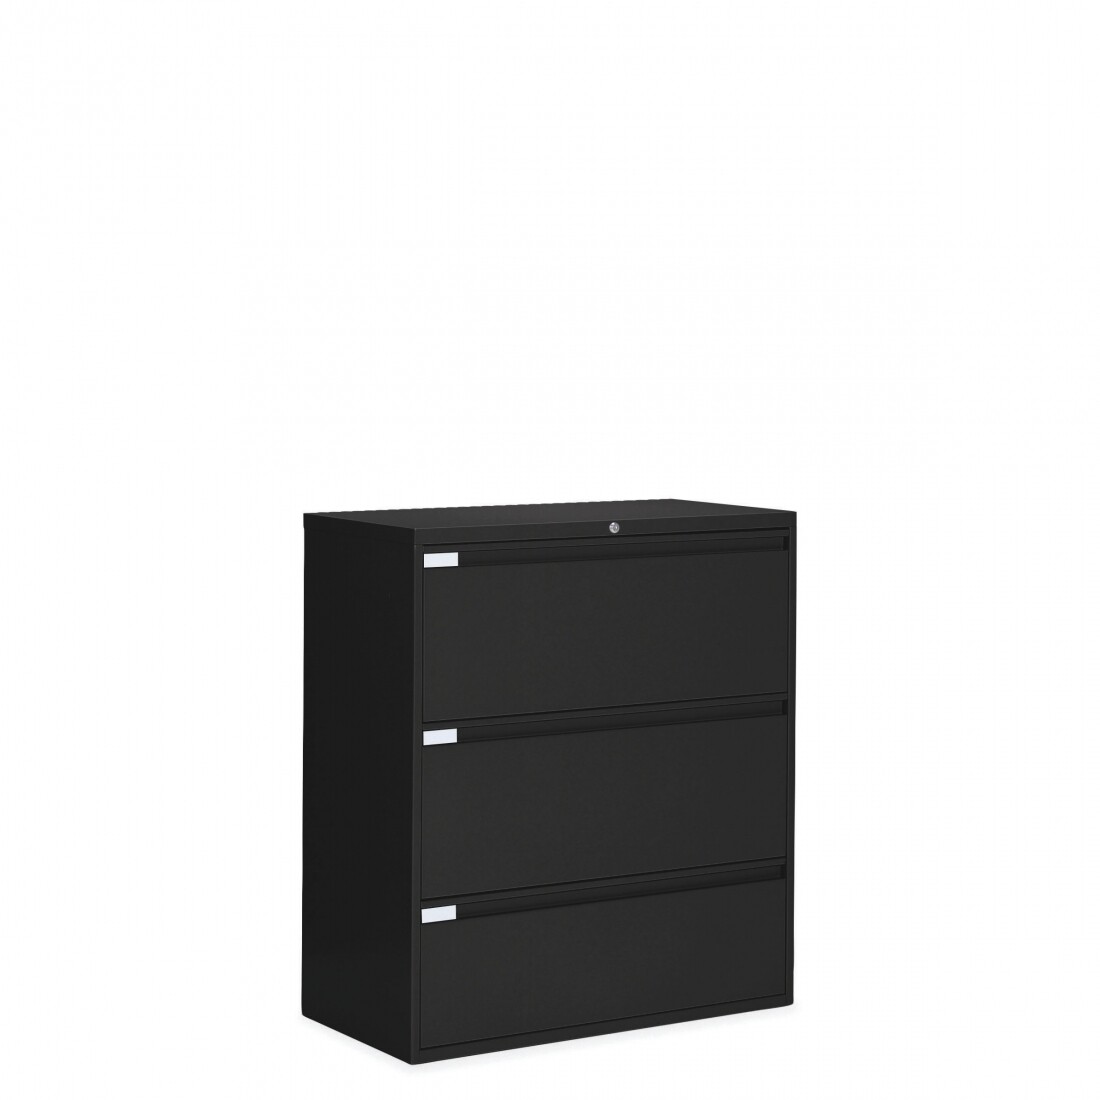 Global 9300 Plus Series 36”W 3 Drawer Lateral File